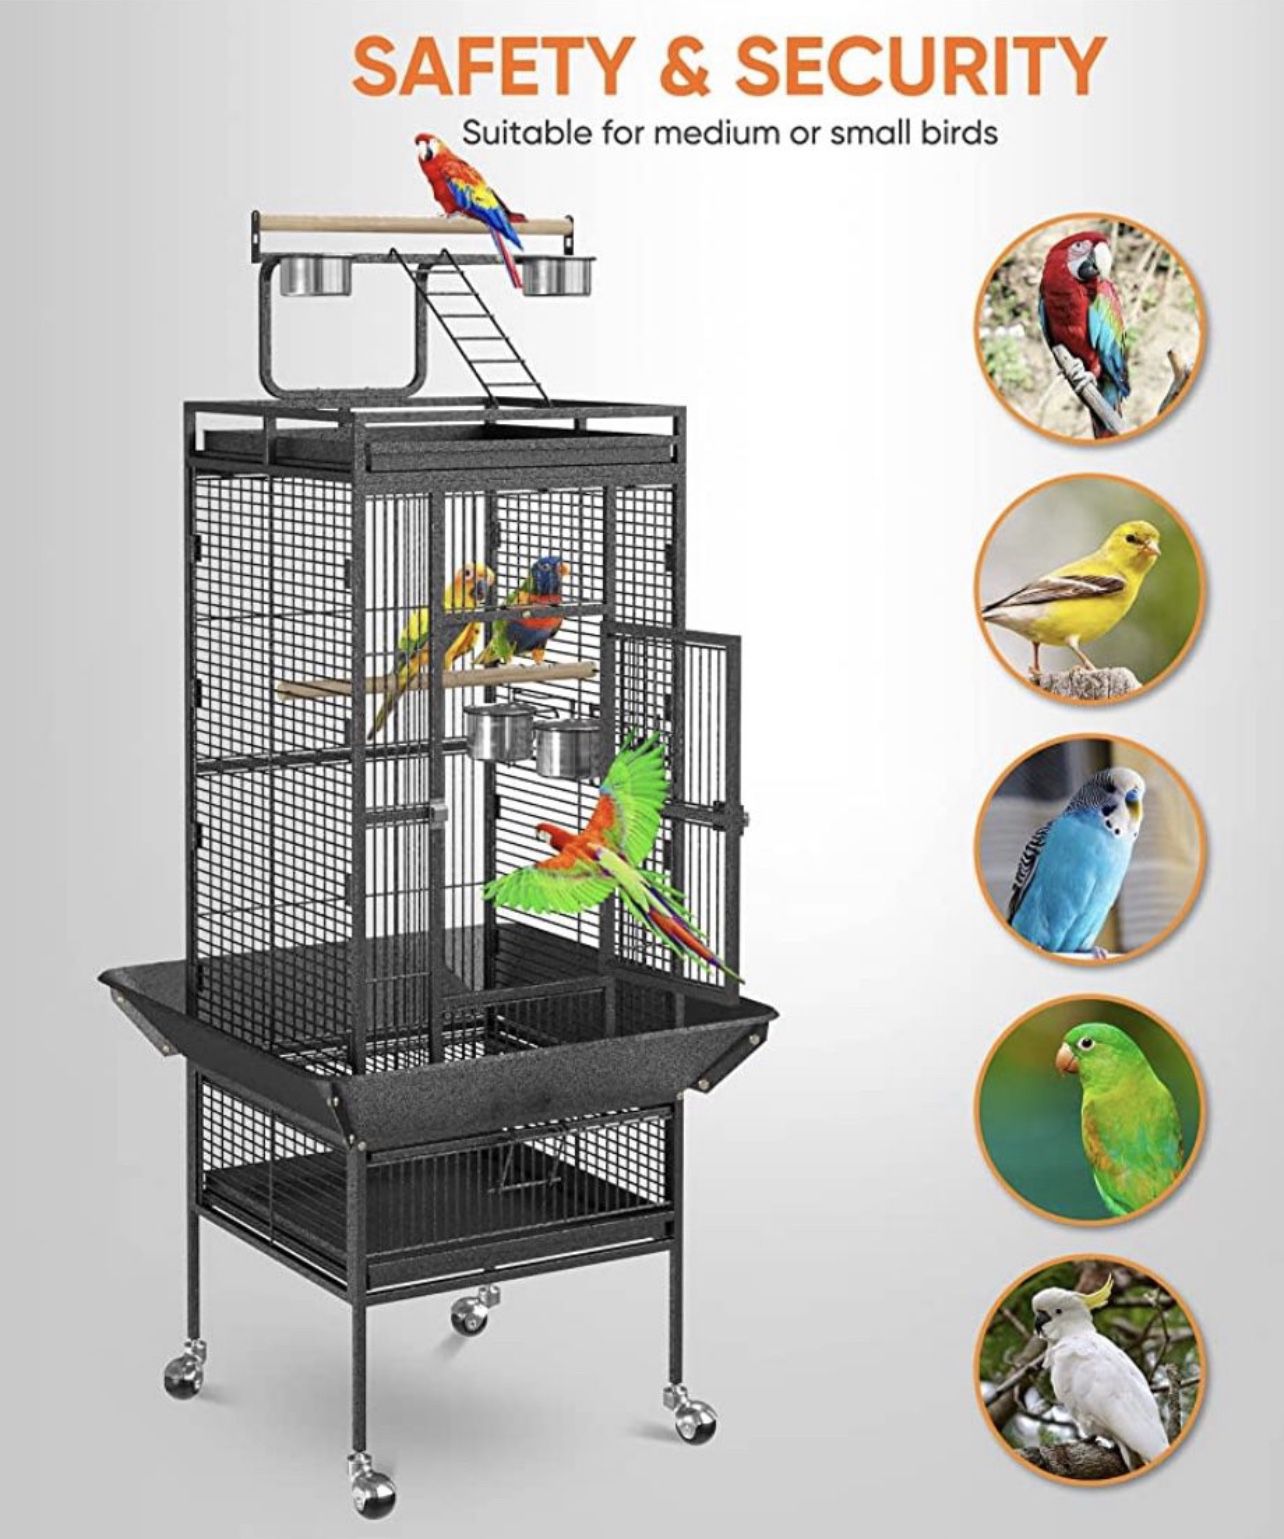 61-inch Playtop Parrot Bird Cages, Wrought Iron Large Birdcage with Rolling Stand for Parakeet Cockatiels Quaker Conure Lovebird Finch Canary Small Me